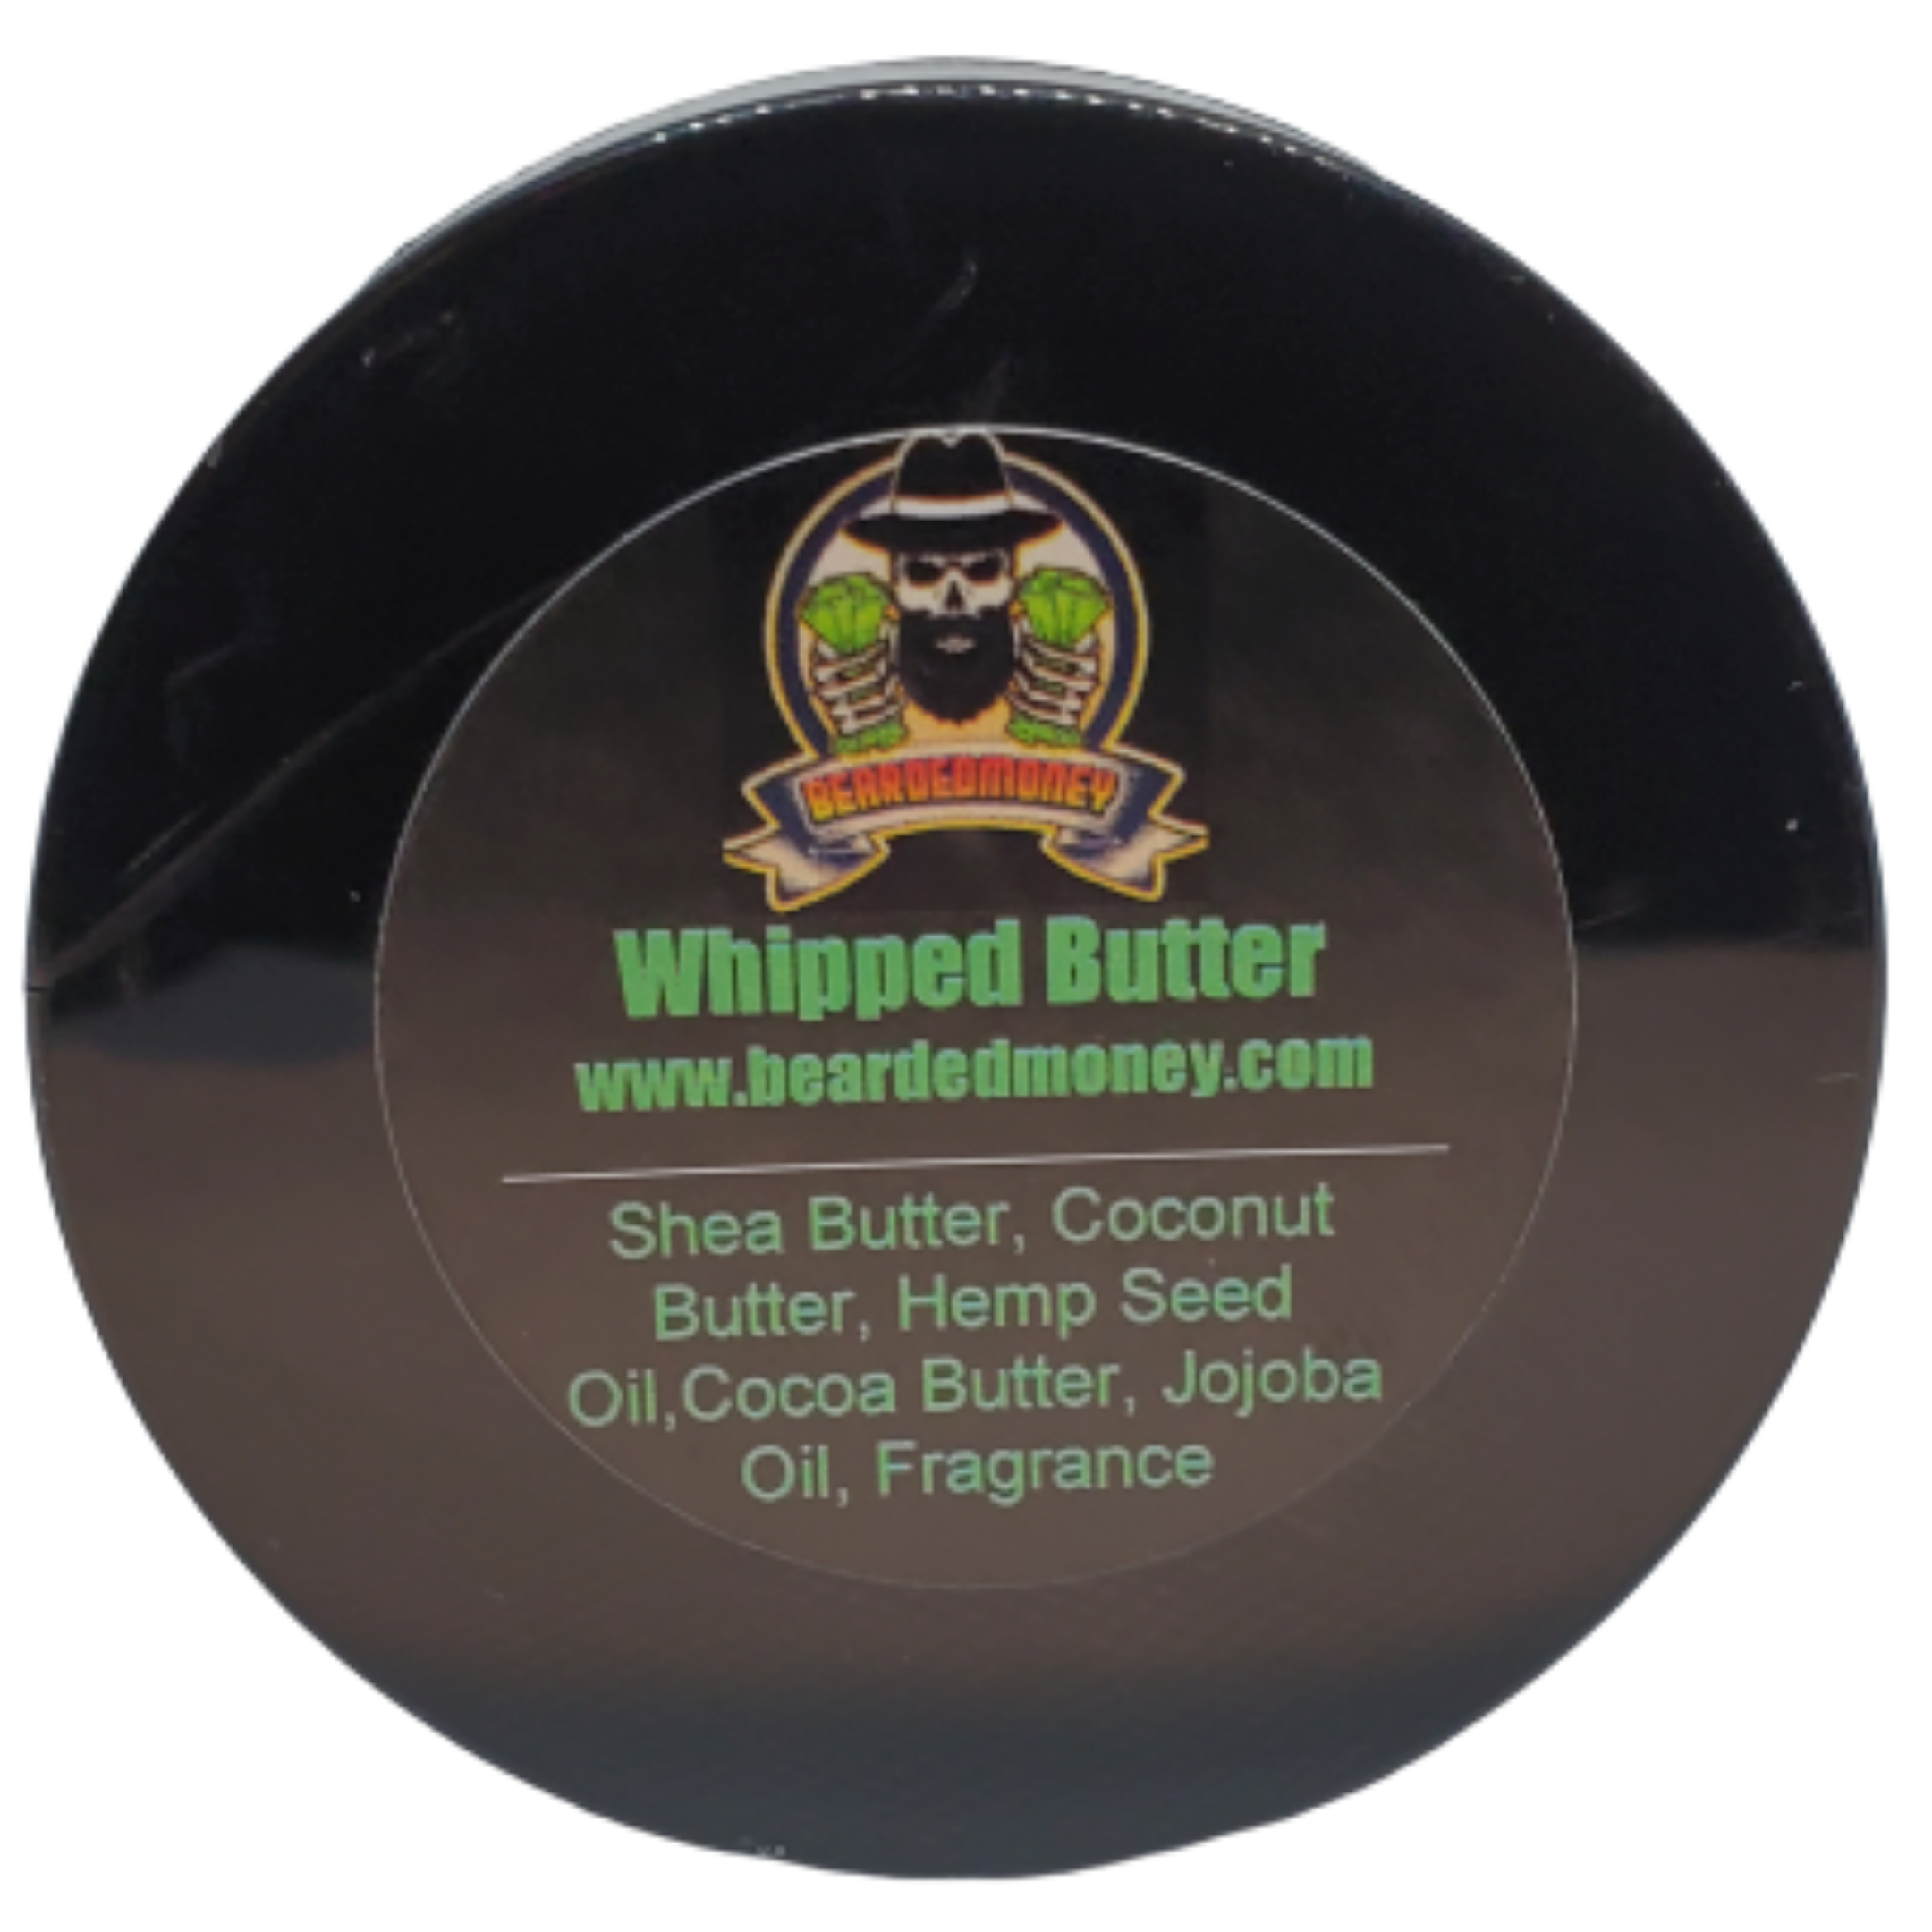 Whipped Odin Beard & Body Butter is a refreshing and masculine, this male fine fragrance type is woody and earthy with bursts of zesty citrus.